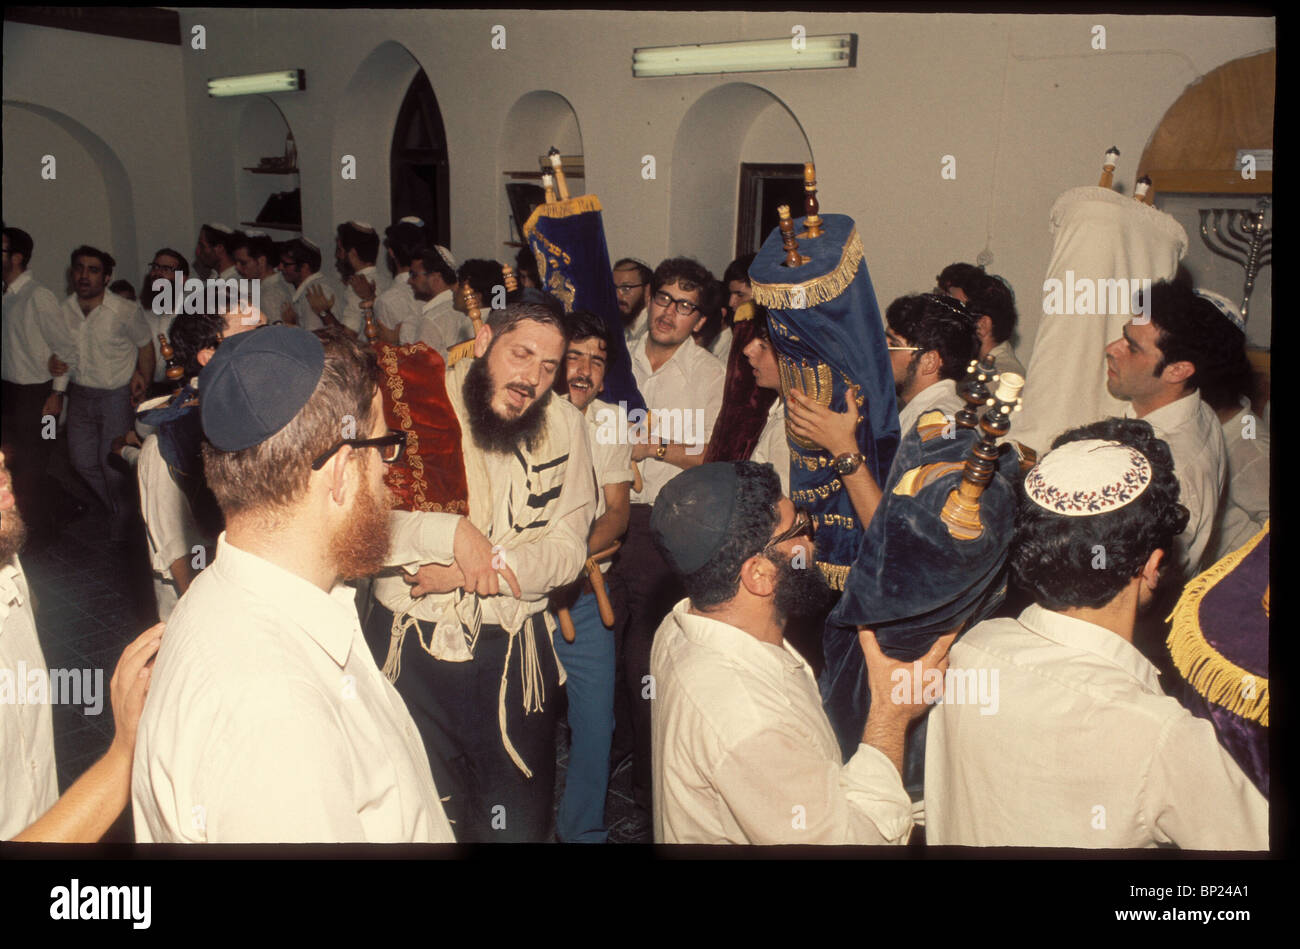 SIMCHAT TORAH - THE LAST DAY OF SUCCOT ON WHICH THE COMPLETION OF READING THE ANNUAL CYCLE OF THE TORAH IS CELEBRATED BY Stock Photo